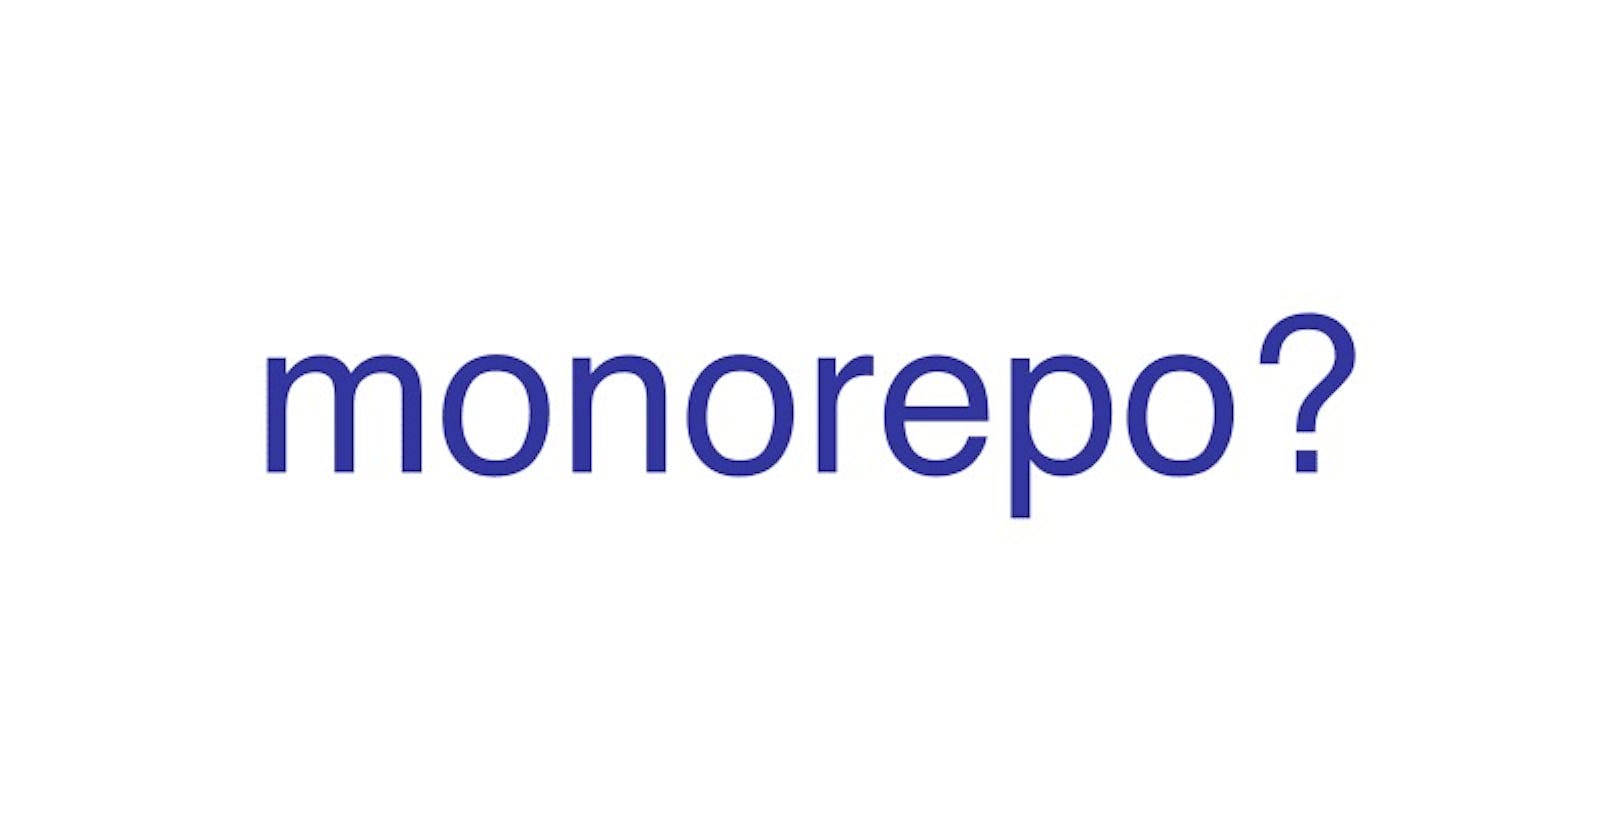 Sharing of code in single repositories. Monorepo